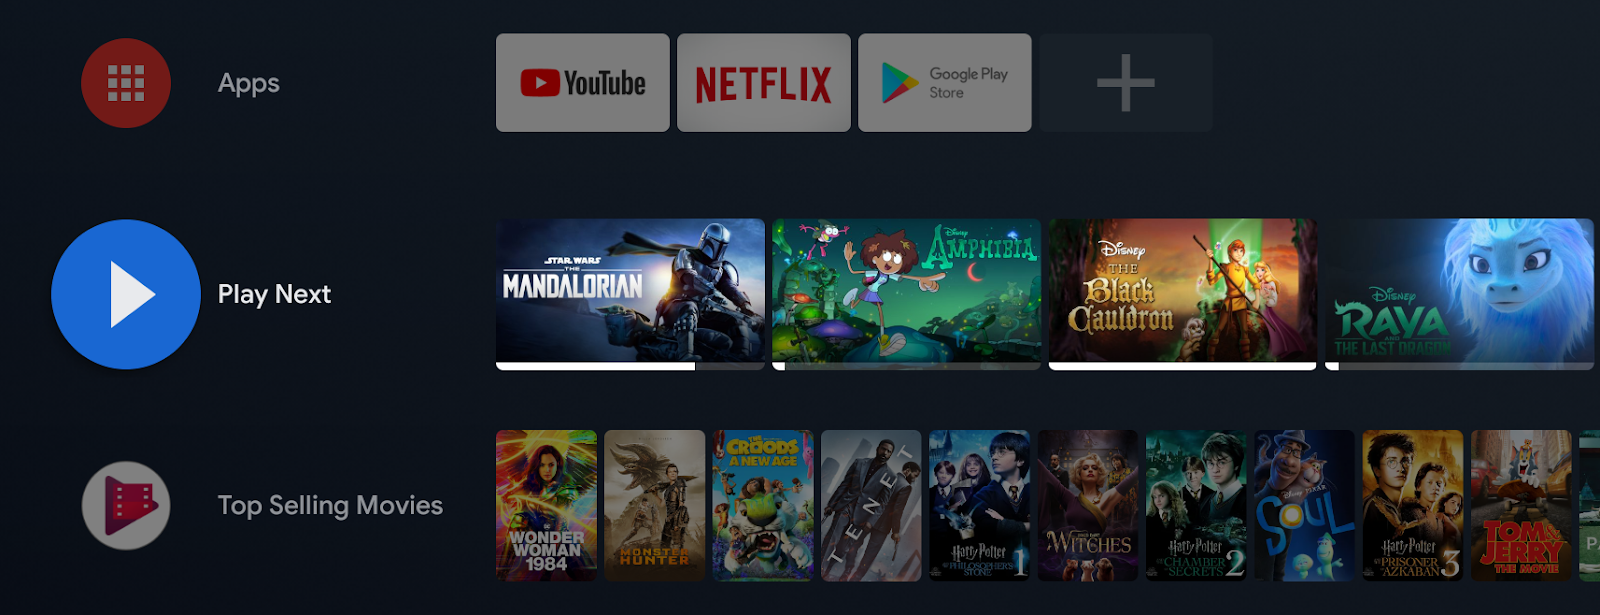 Improve Engagement on Watch Next for Movie/TV Episodes on Android TV